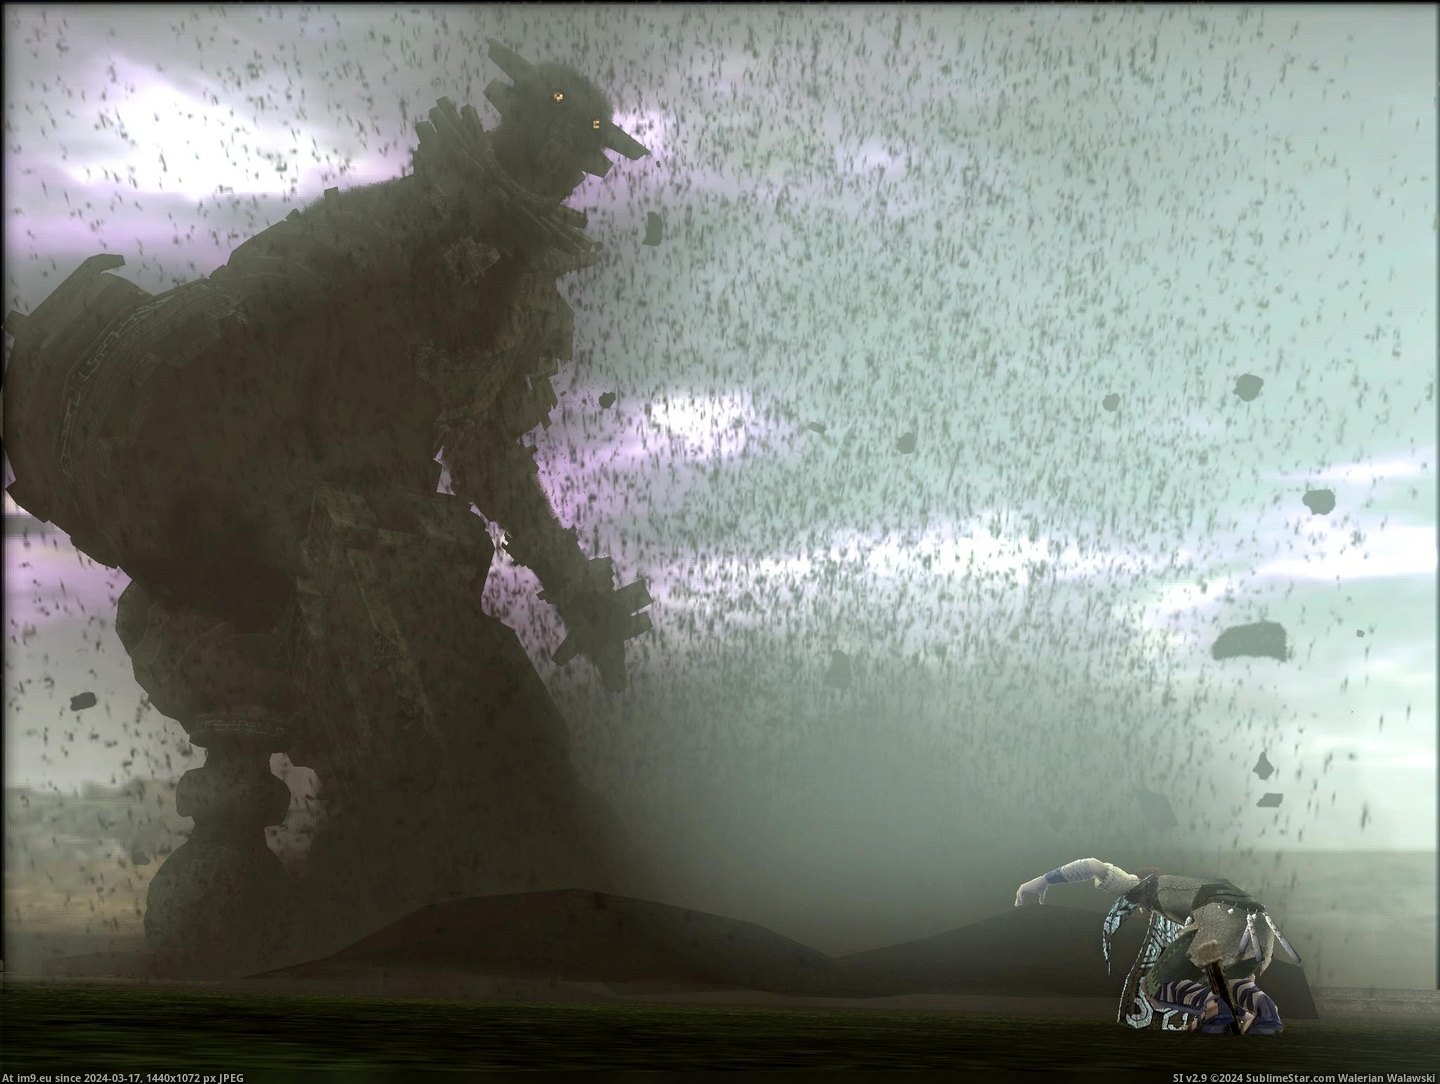 #Game #Shadow #Colossus #Video Video Game Shadow Of The Colossus 46849 Pic. (Bild von album Games Wallpapers))